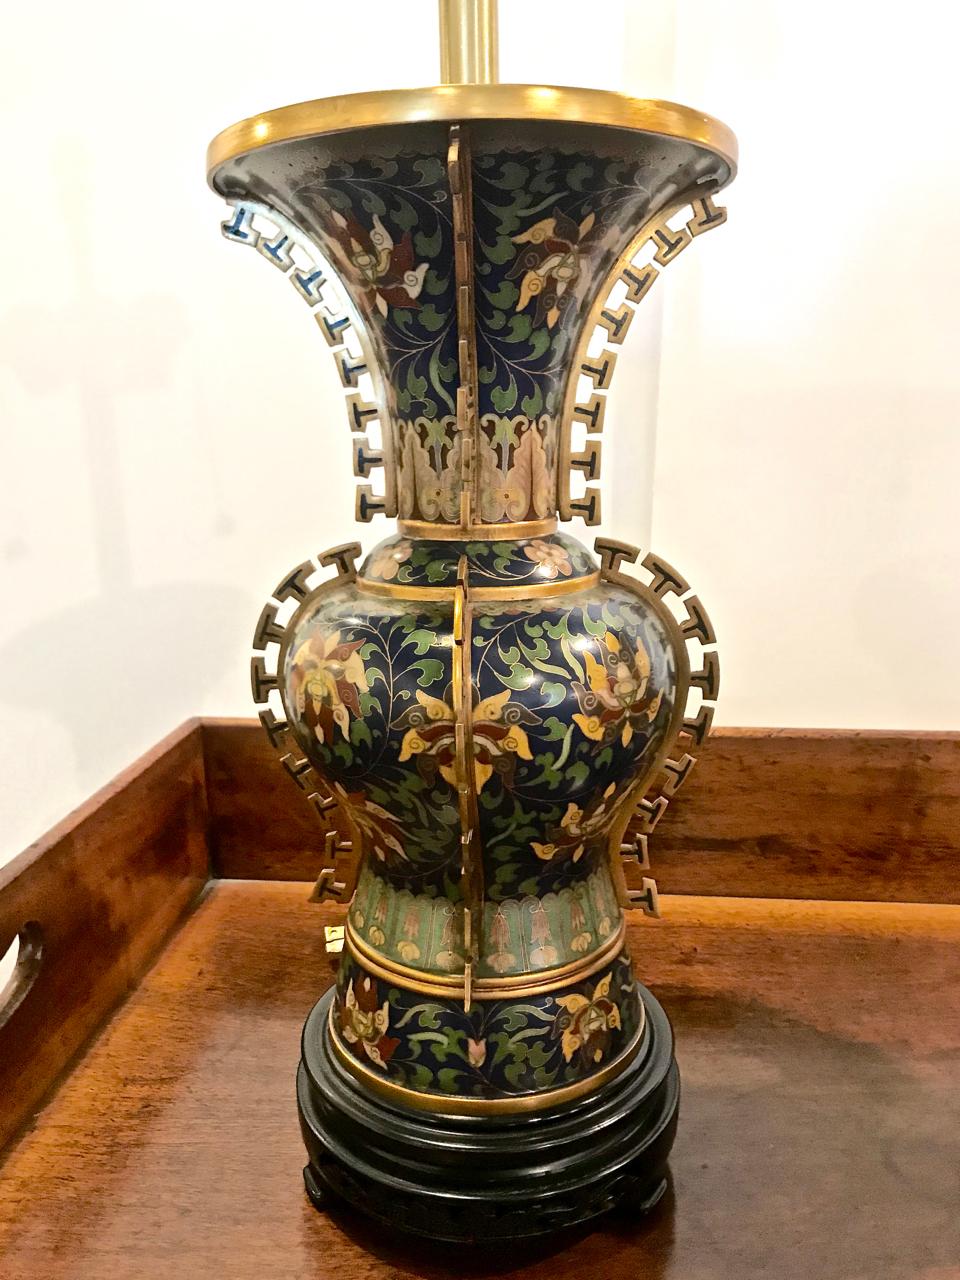 This is a pair of very fine quality deco period Chinese cloisonne and gilt bronze vases that have been fitted as lamps by the renown Marbro Lamp company during the last quarter of the 20th century. The photos detail the quality of the bronze vases